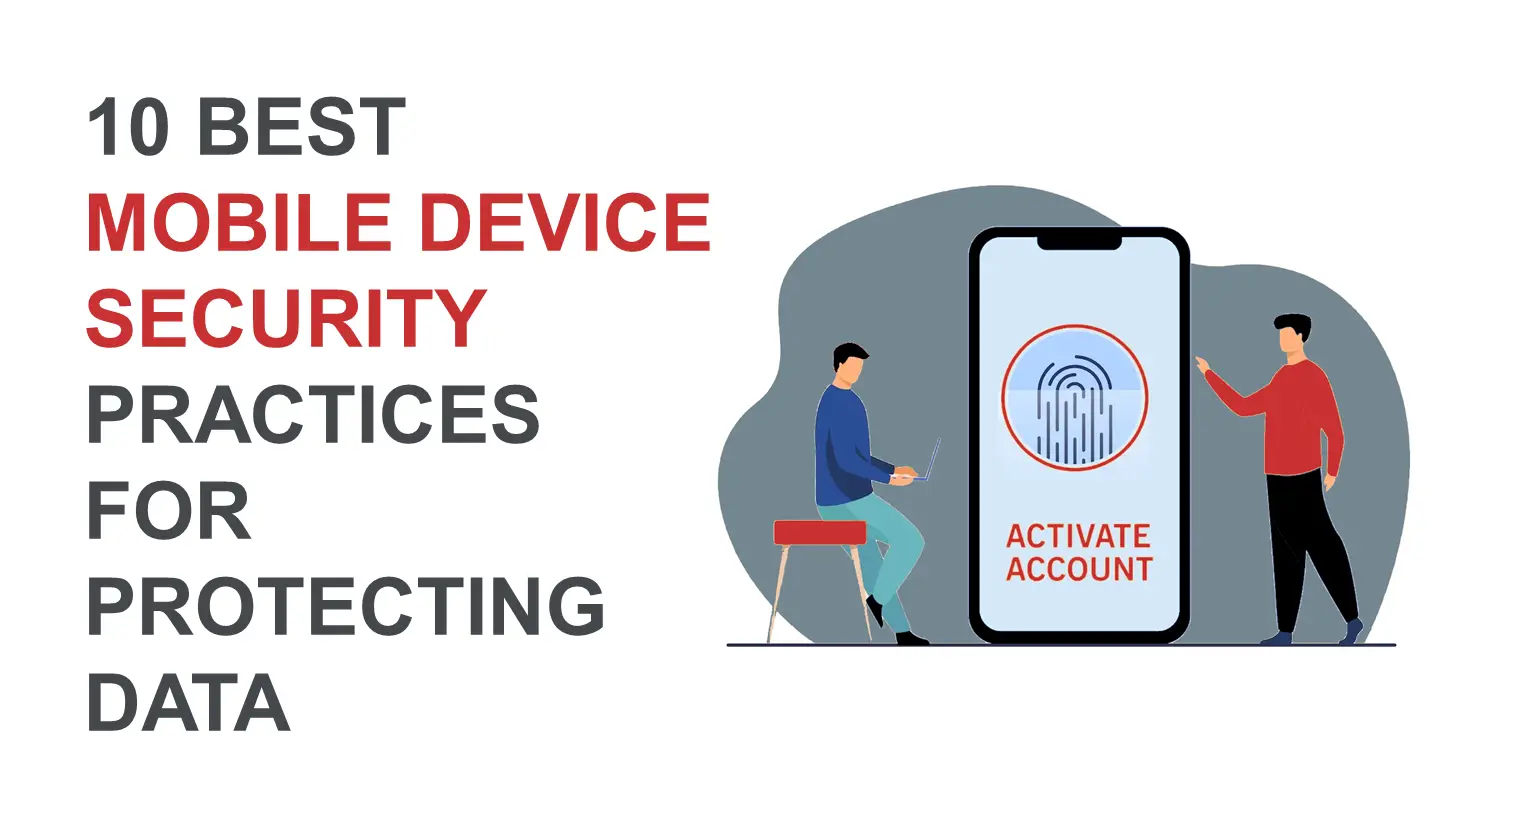 10 Best Mobile Device Security Practices for Protecting Data